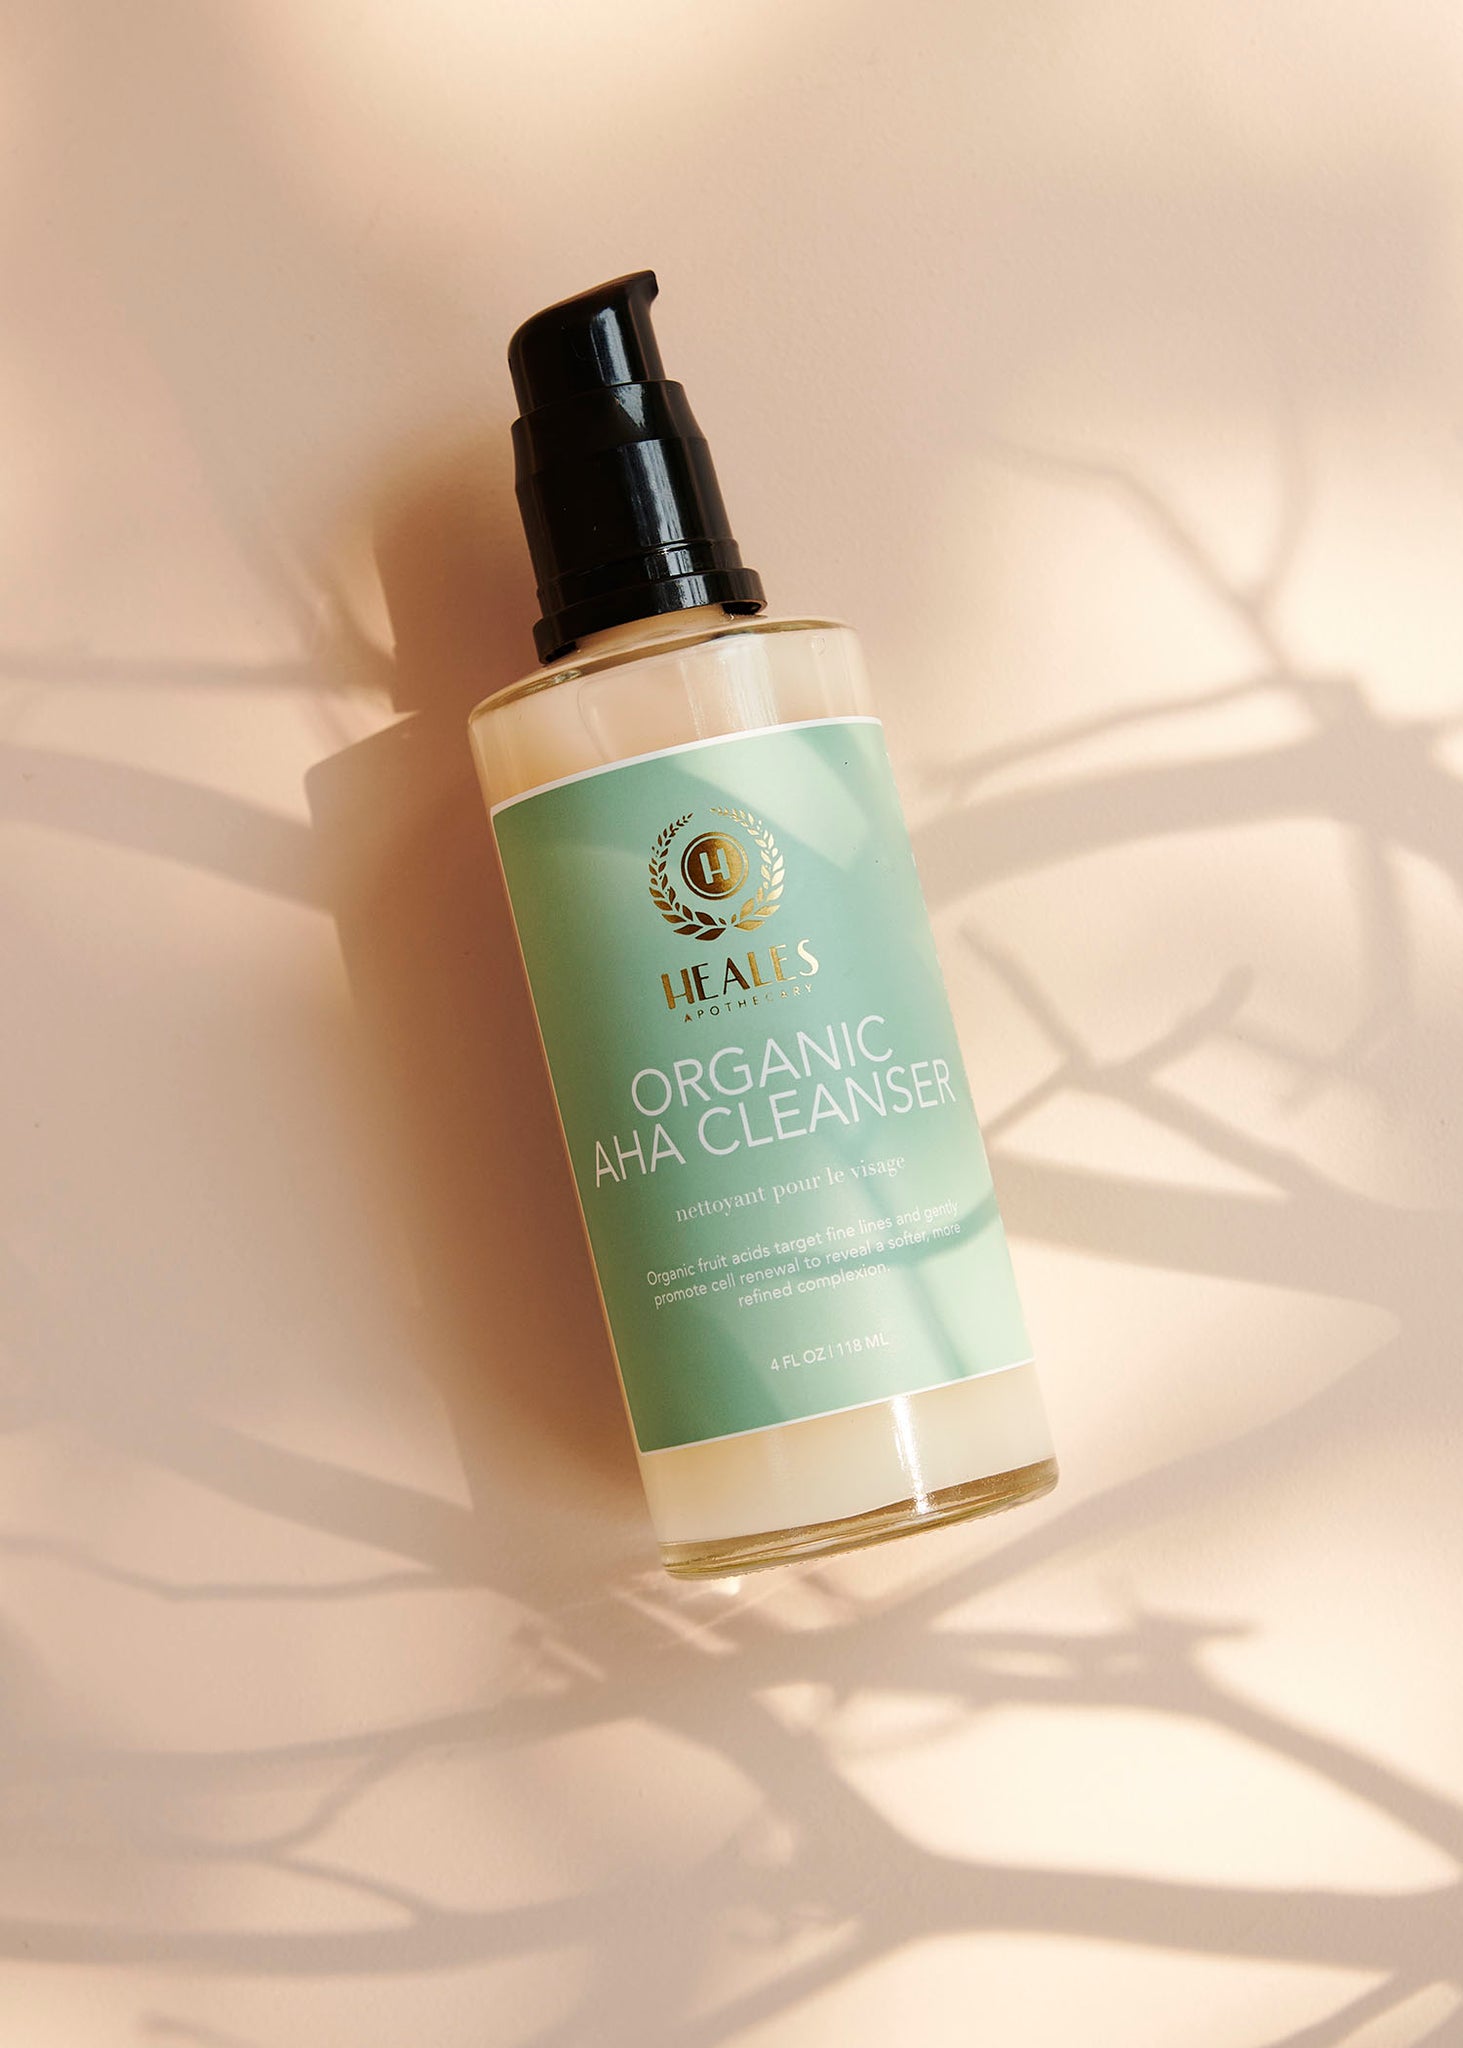 AHA organic cleanser from Heales Apothecary